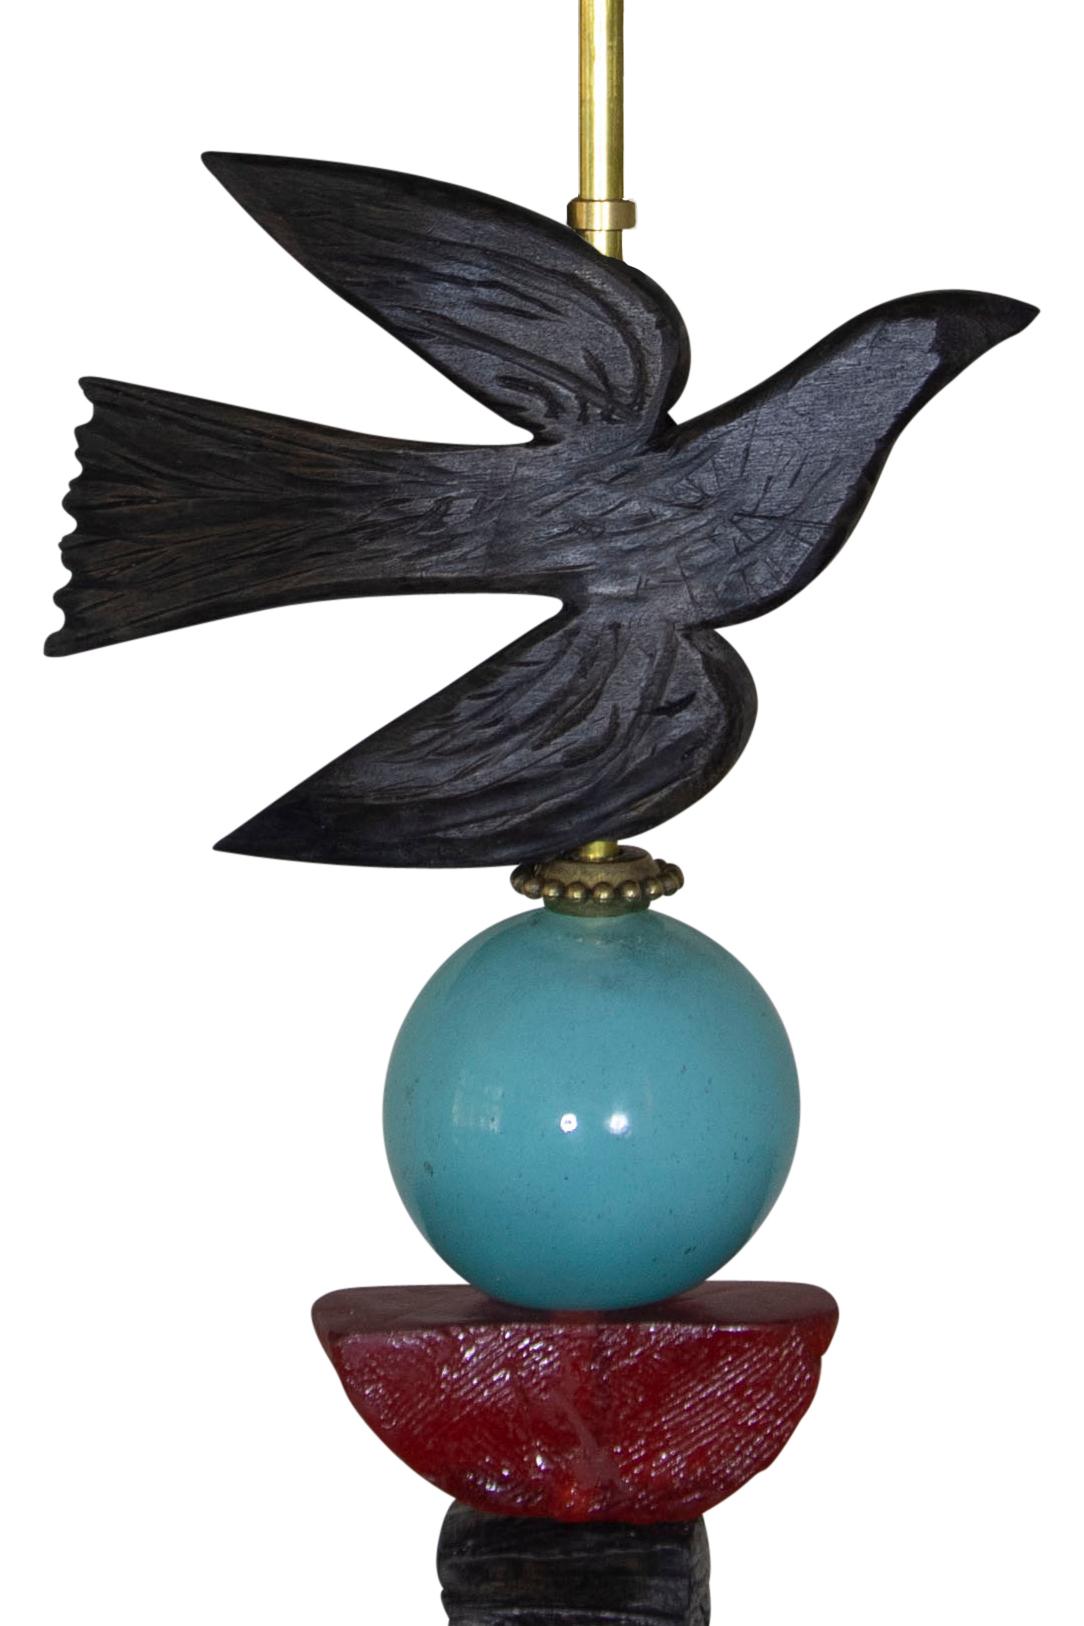 This contemporary Margit Wittig table lamp sits on a rectangular slate base and includes a hand blown glass sphere in blue. The sculpted contemporary bird in flight, with its organic texture is a signature of Margit Wittig's work. The materials